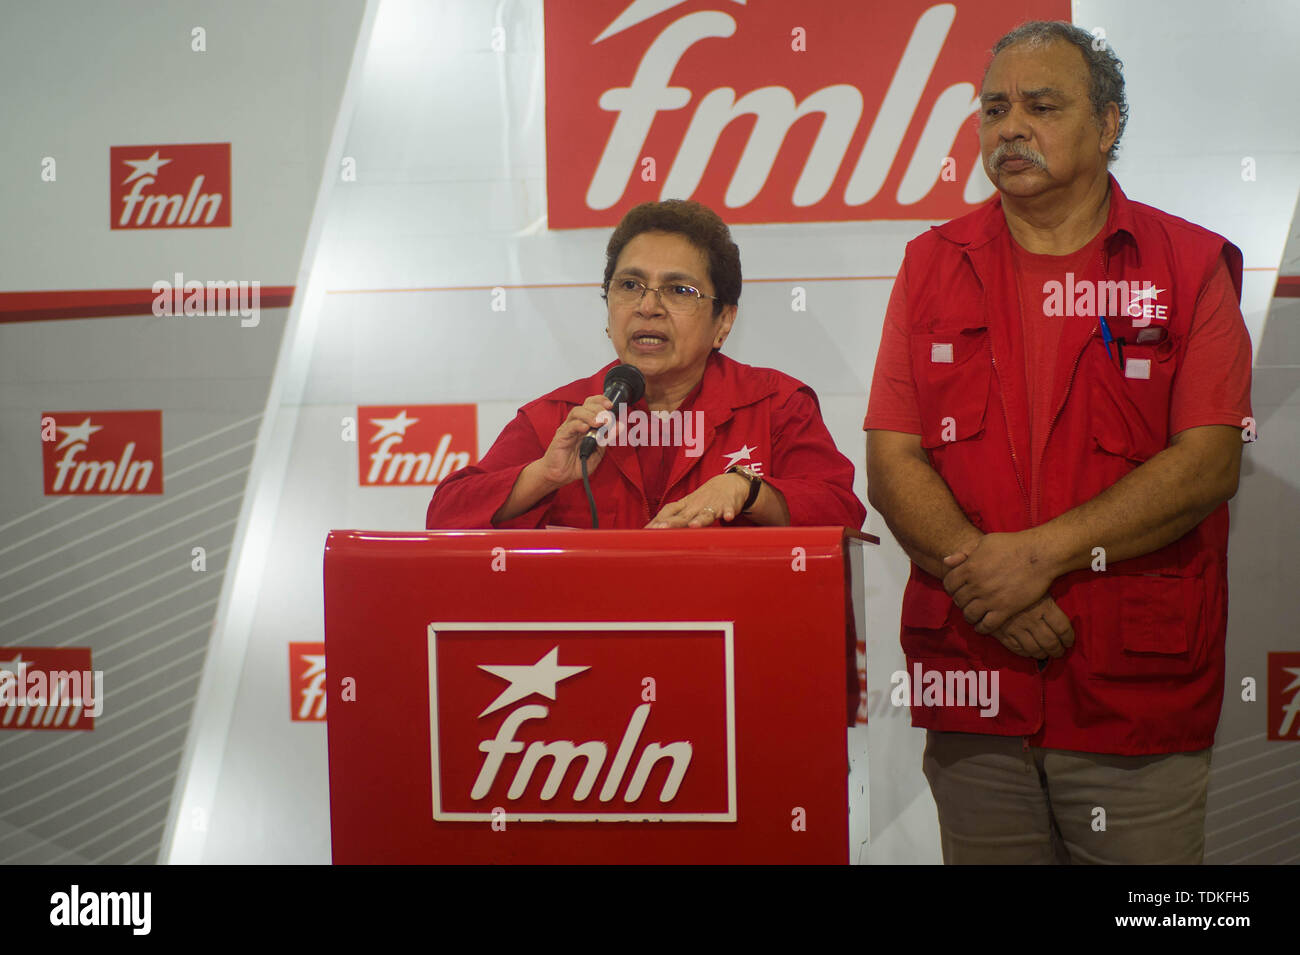 San Salvador, El Salvador. 17th June, 2019. Salvadoran leftist FMLN elects new authorities. SILVIA CARTAGENA whoÂ´s in charge of the electoral process gives a press conference. Credit: Camilo Freedman/ZUMA Wire/Alamy Live News Stock Photo